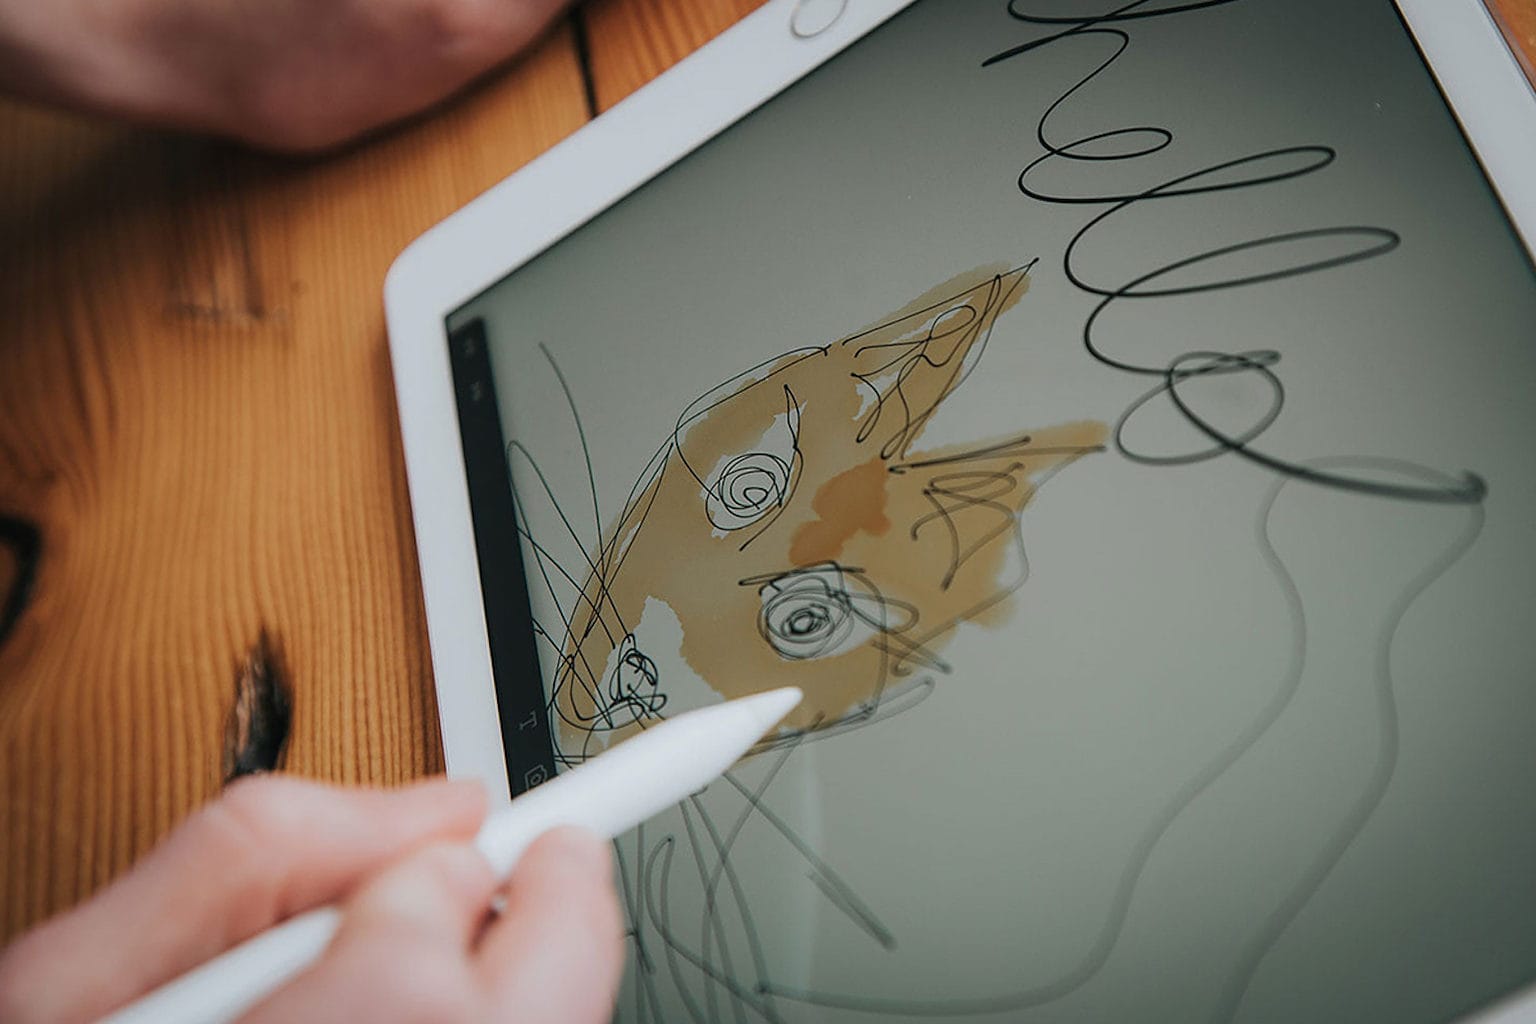 Get everything you'd expect from an iPad Pro for less than half of the standard cost.